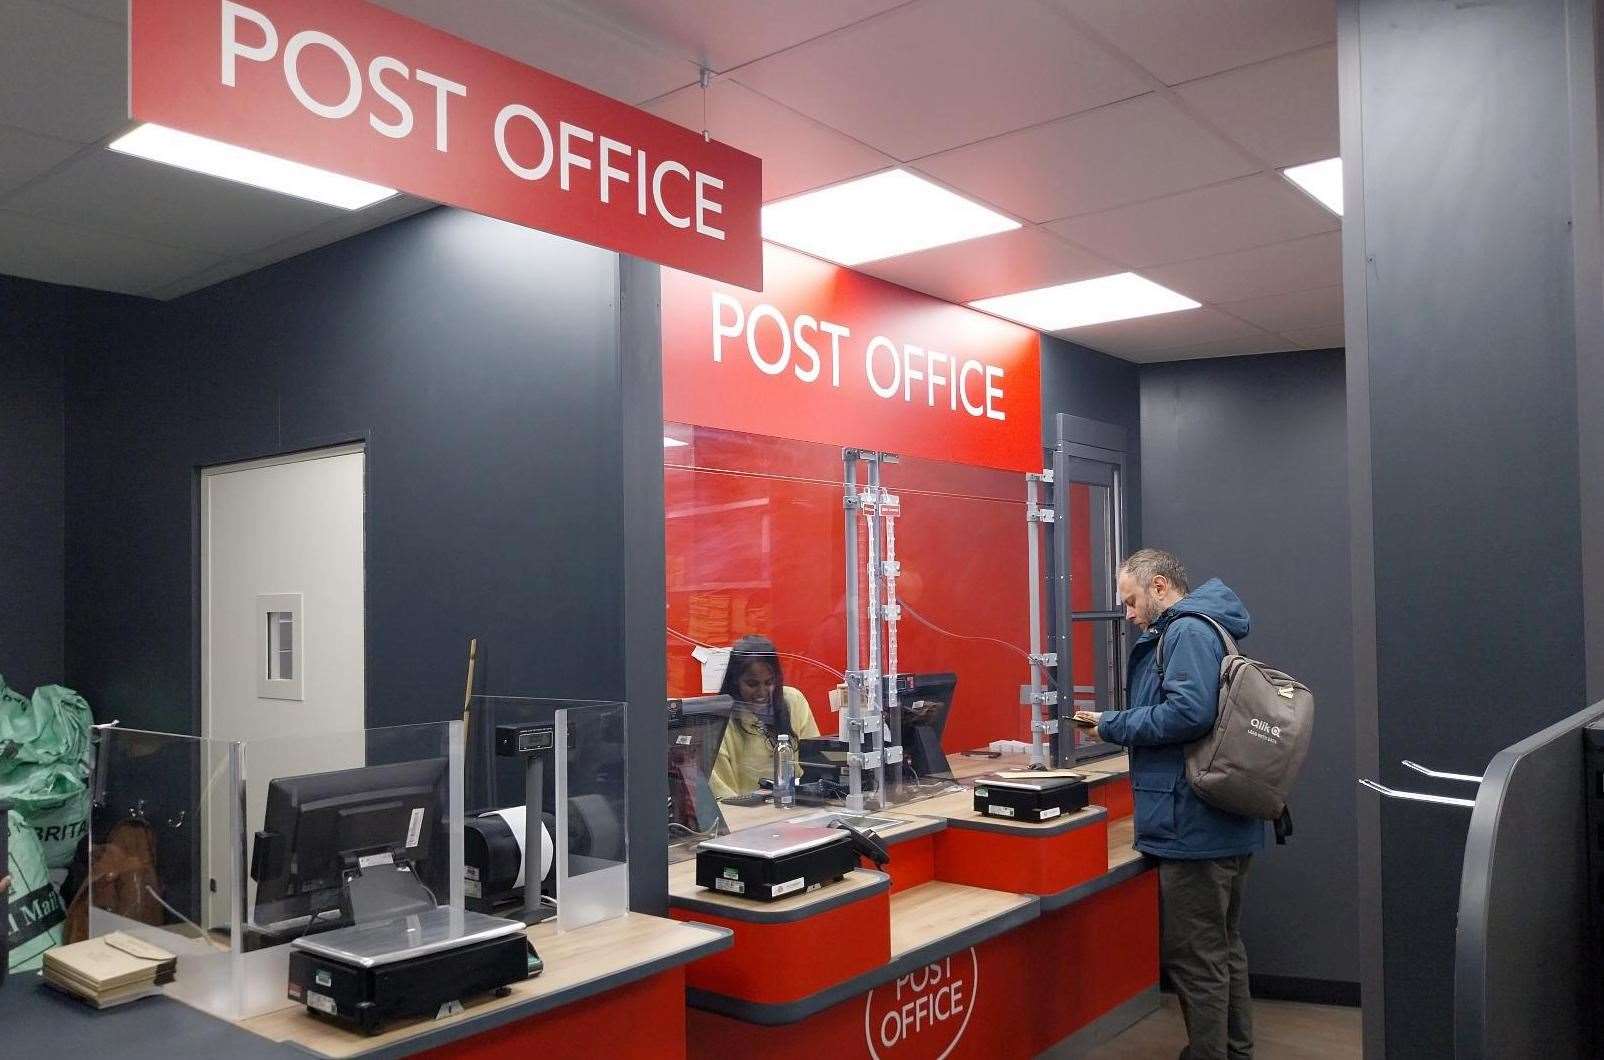 Customers have already began using the branch in Tonbridge. Picture: Post Office